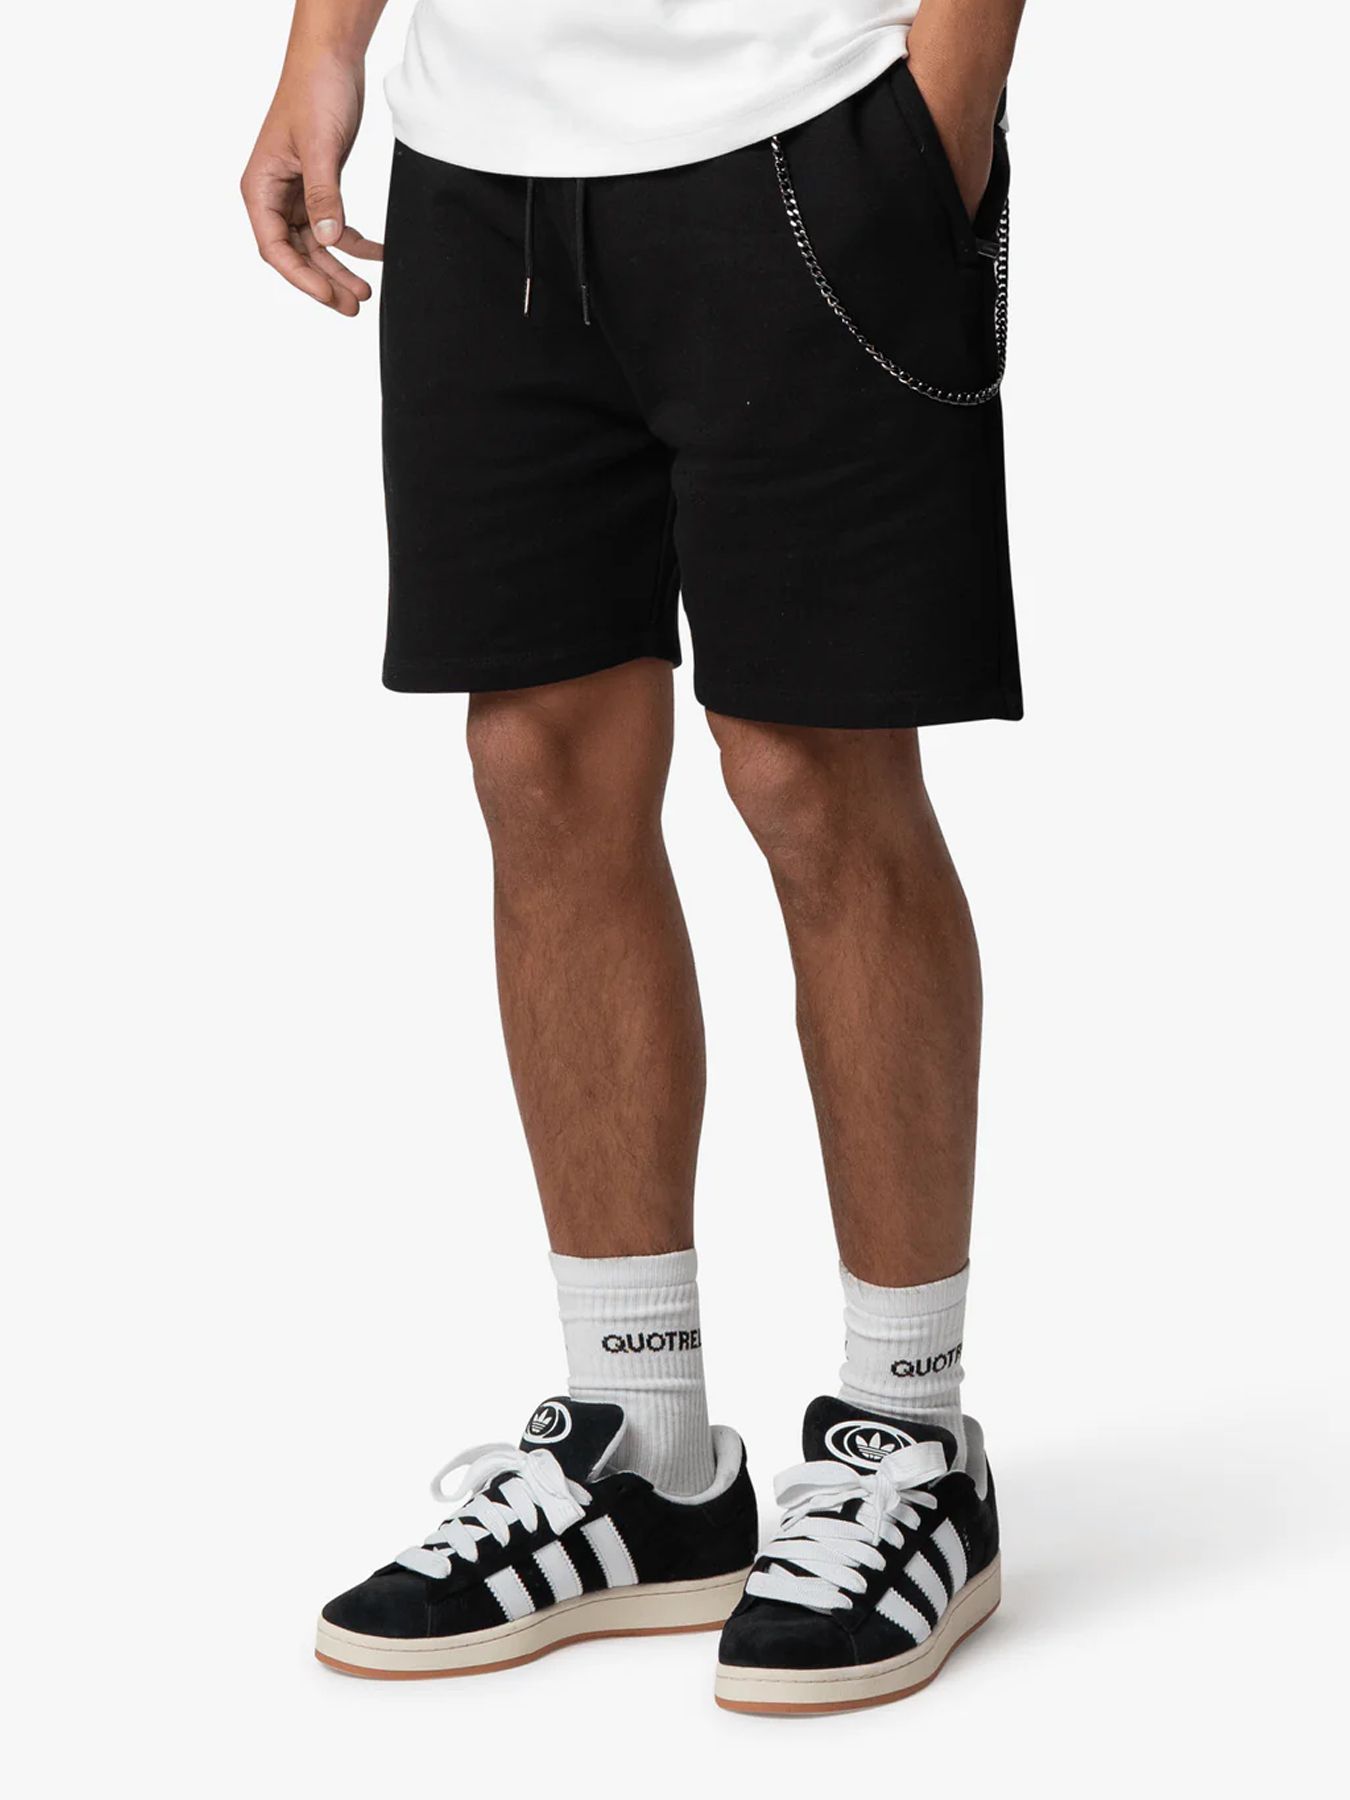 Quotrell Blank Shorts 02A Black 00109016-02A